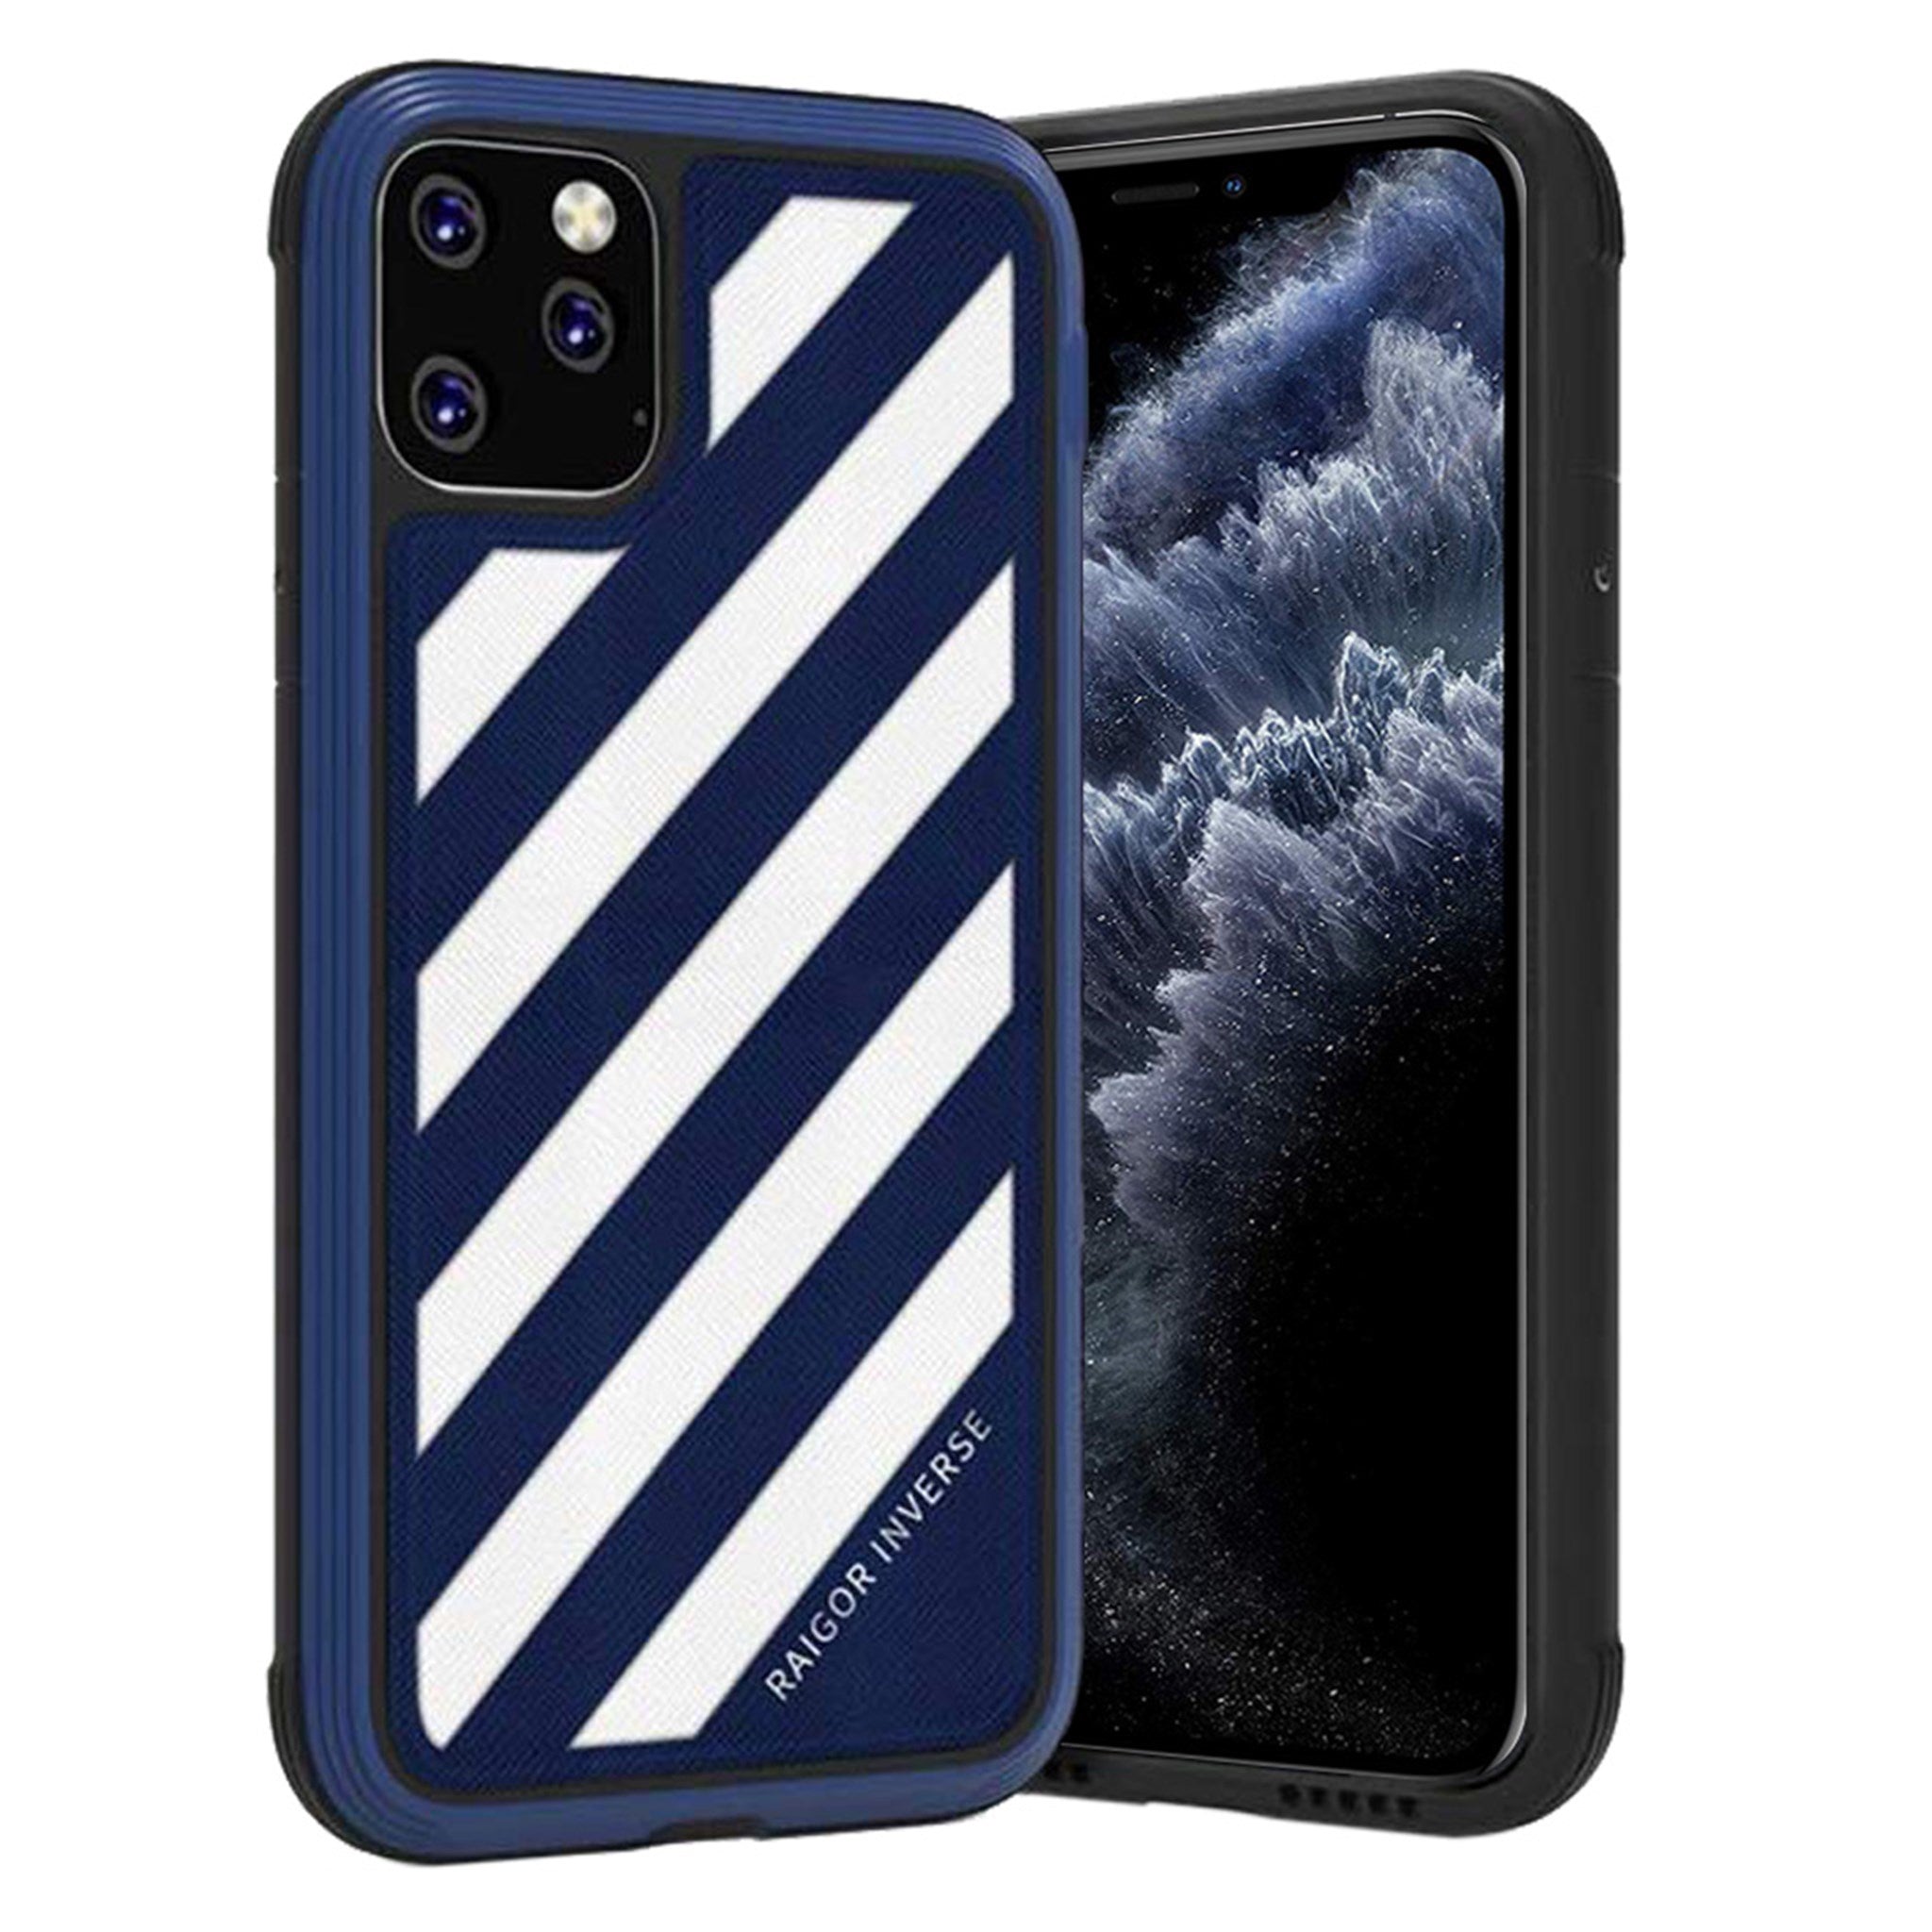 Raigor Inverse RYDER Cover for iPhone 11 Pro - Blue